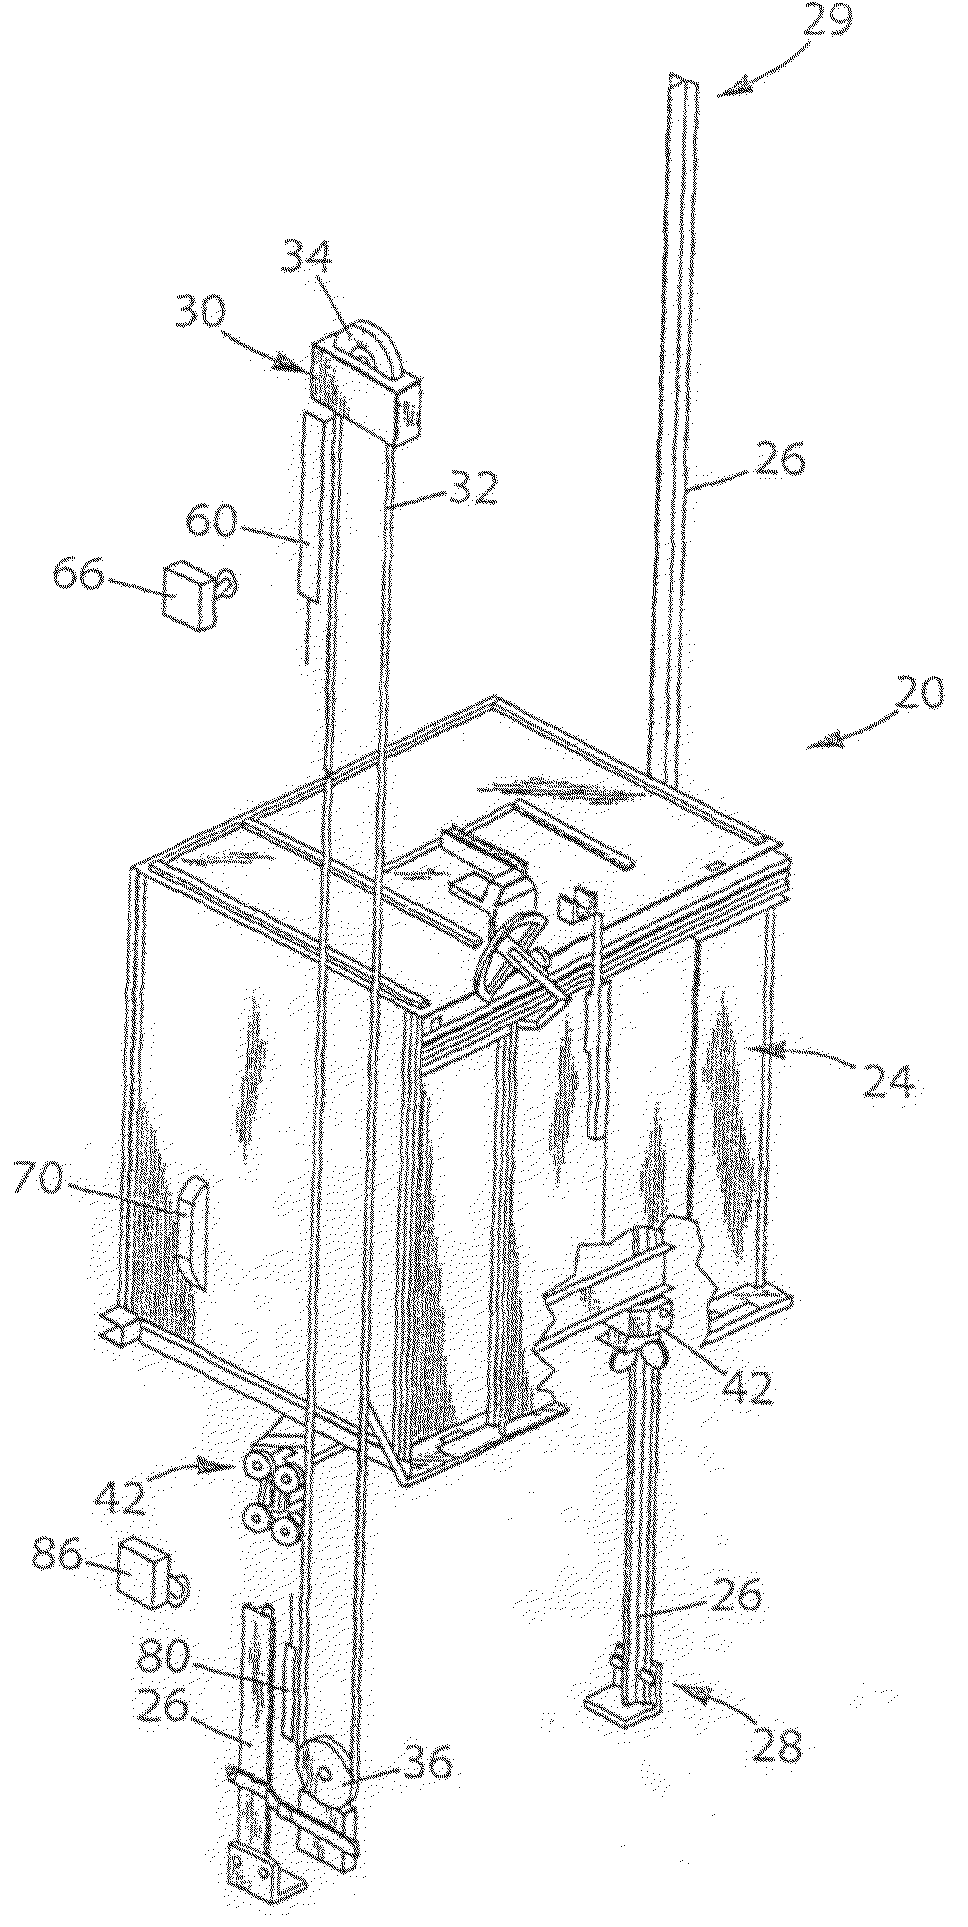 Safety device for securing minimum spaces at the top or bottom of an elevator shaft being inspected, and elevator having such safety devices